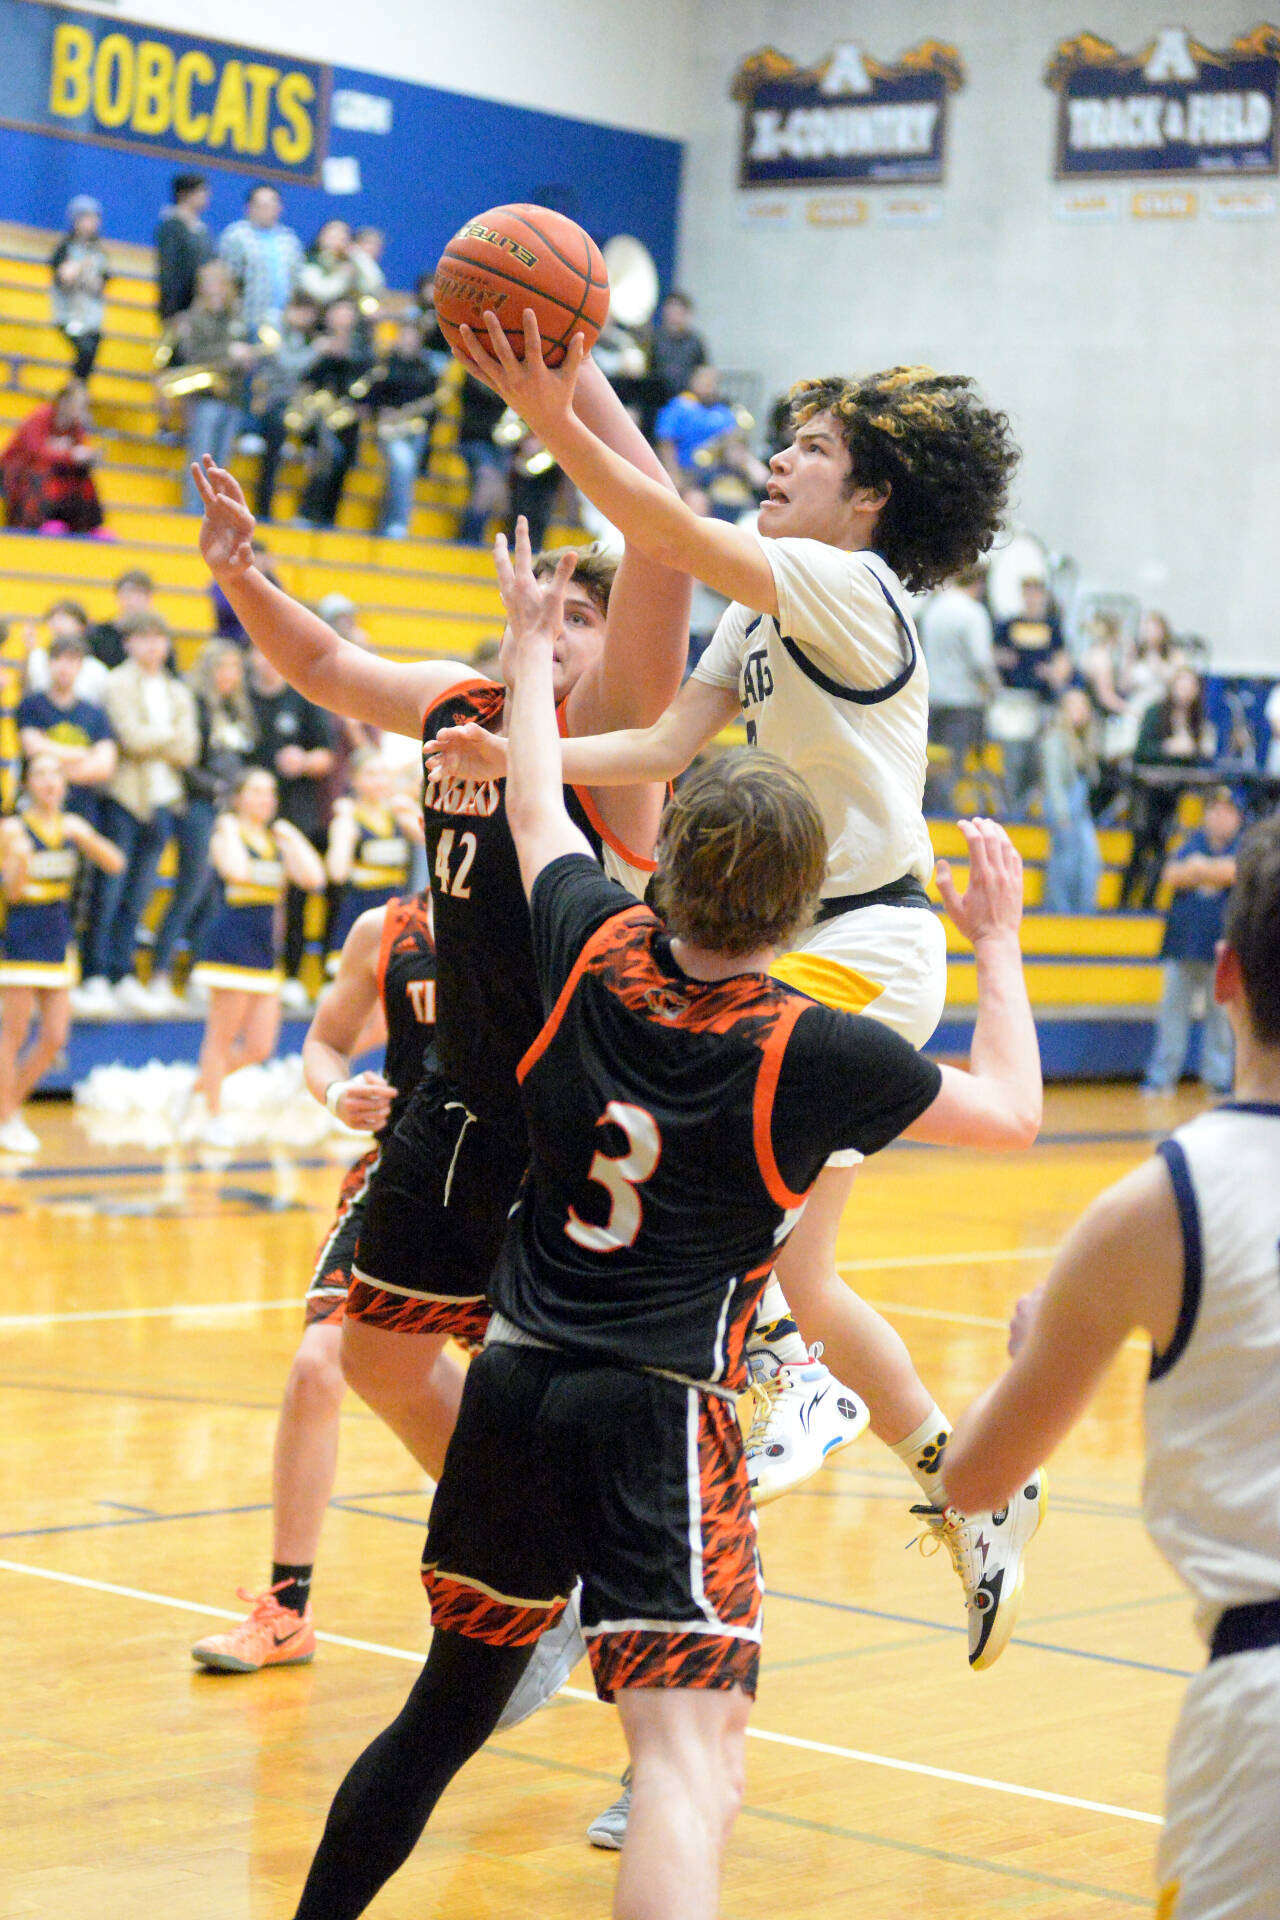 RYAN SPARKS / THE DAILY WORLD
Aberdeen’s Manny Garcia glides to the basket against Centralia’s Cohen Ballard (3) during the Bobcats’ 50-49 win on Tuesday at Sam Benn Gym in Aberdeen.